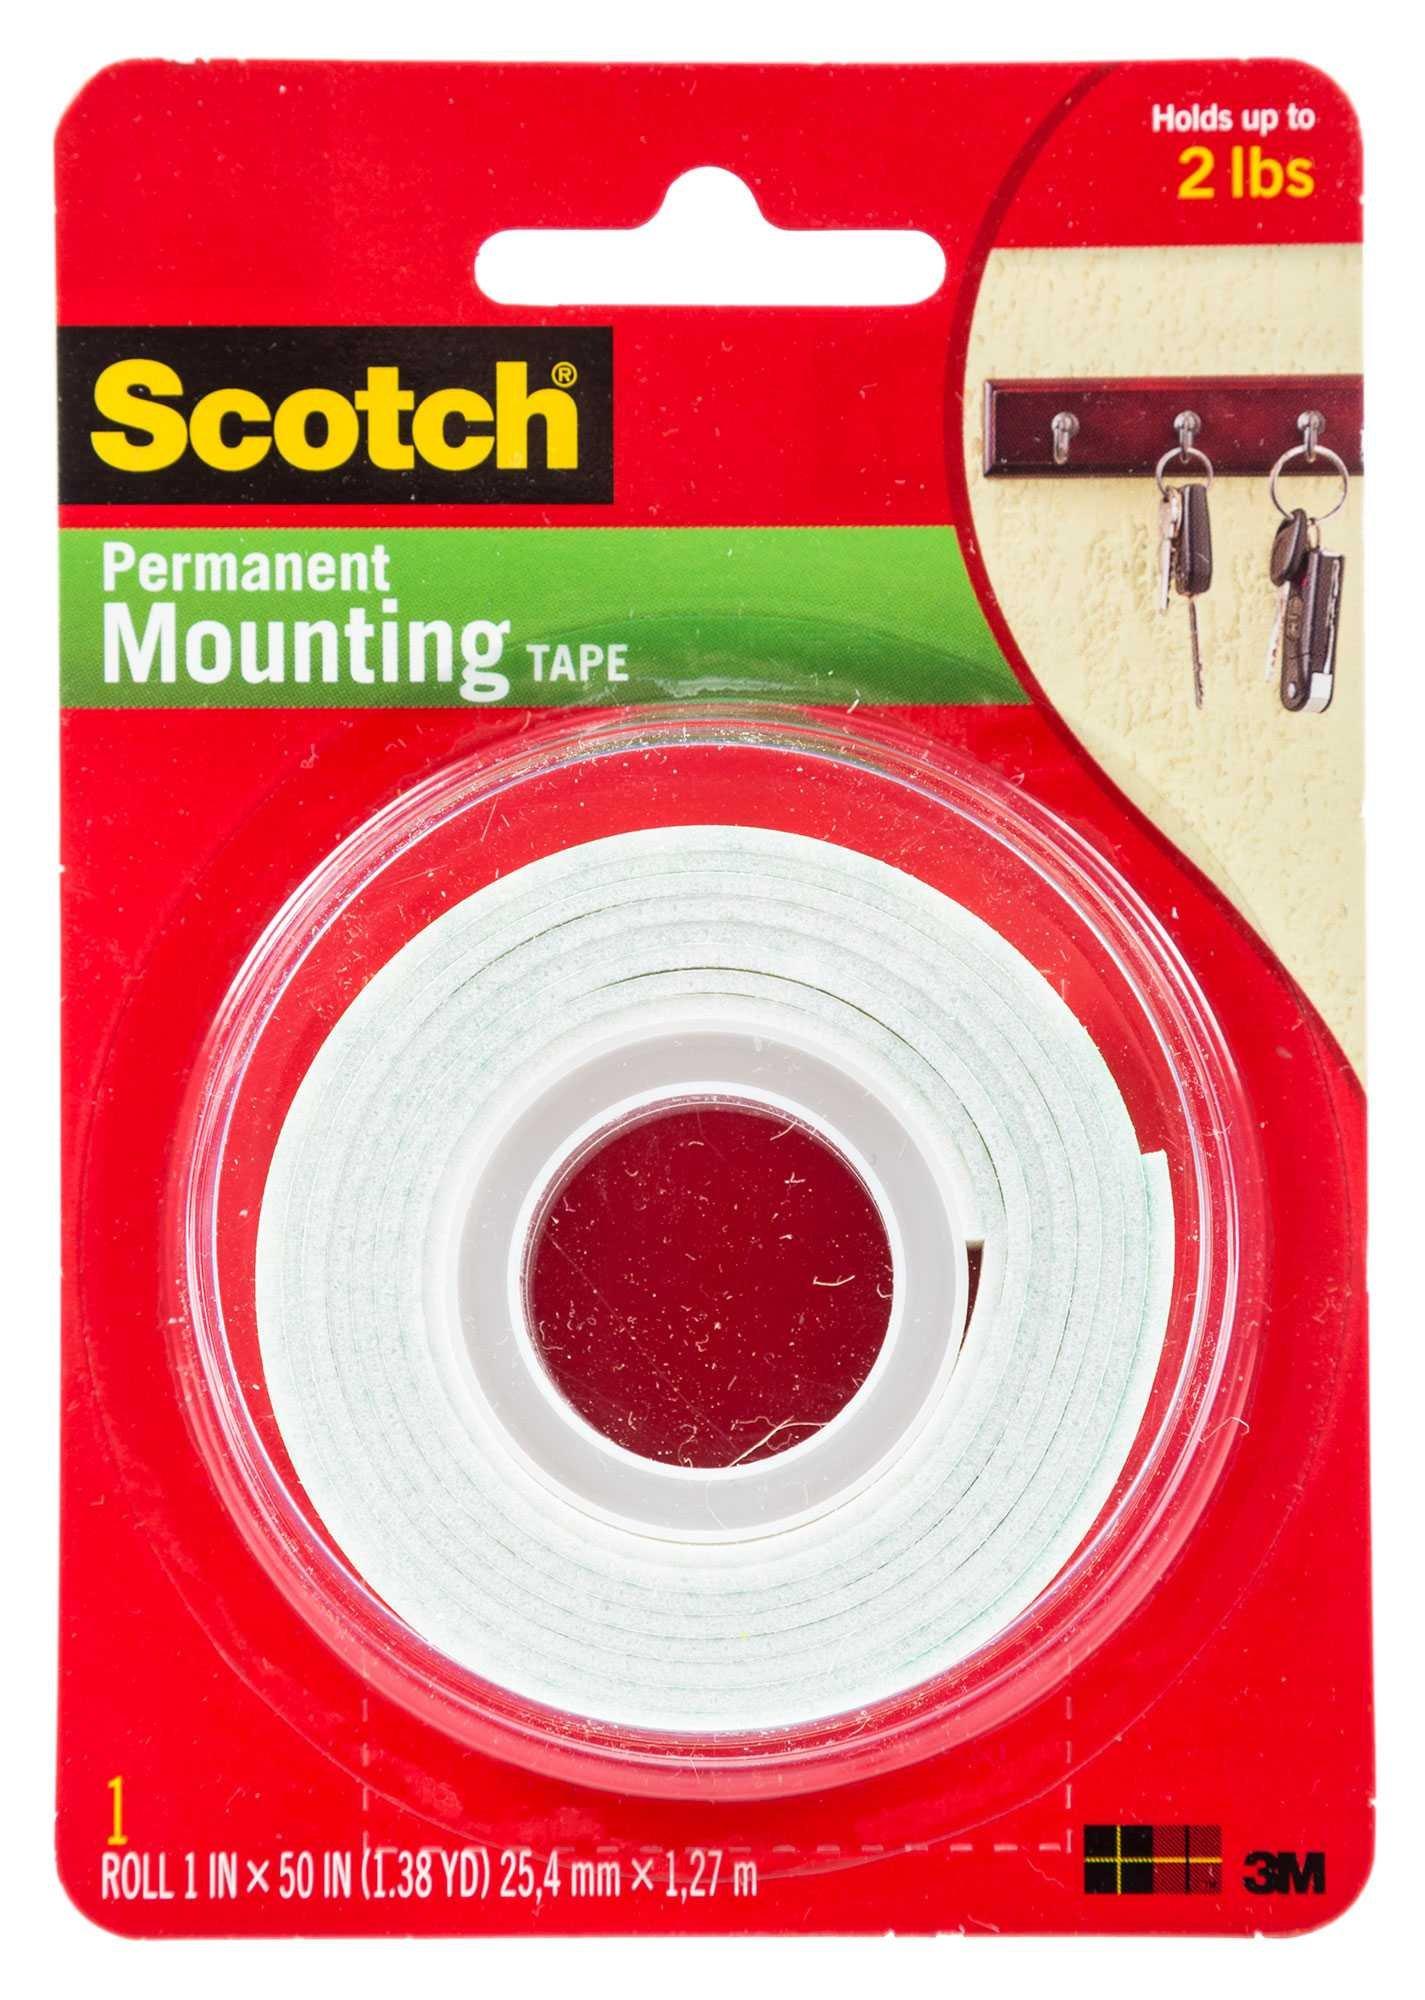 NEED TO HANG SOME HEAVY WALL ART? #SCOTCH MOUNTING TAPE IS WHERE ITS AT! 